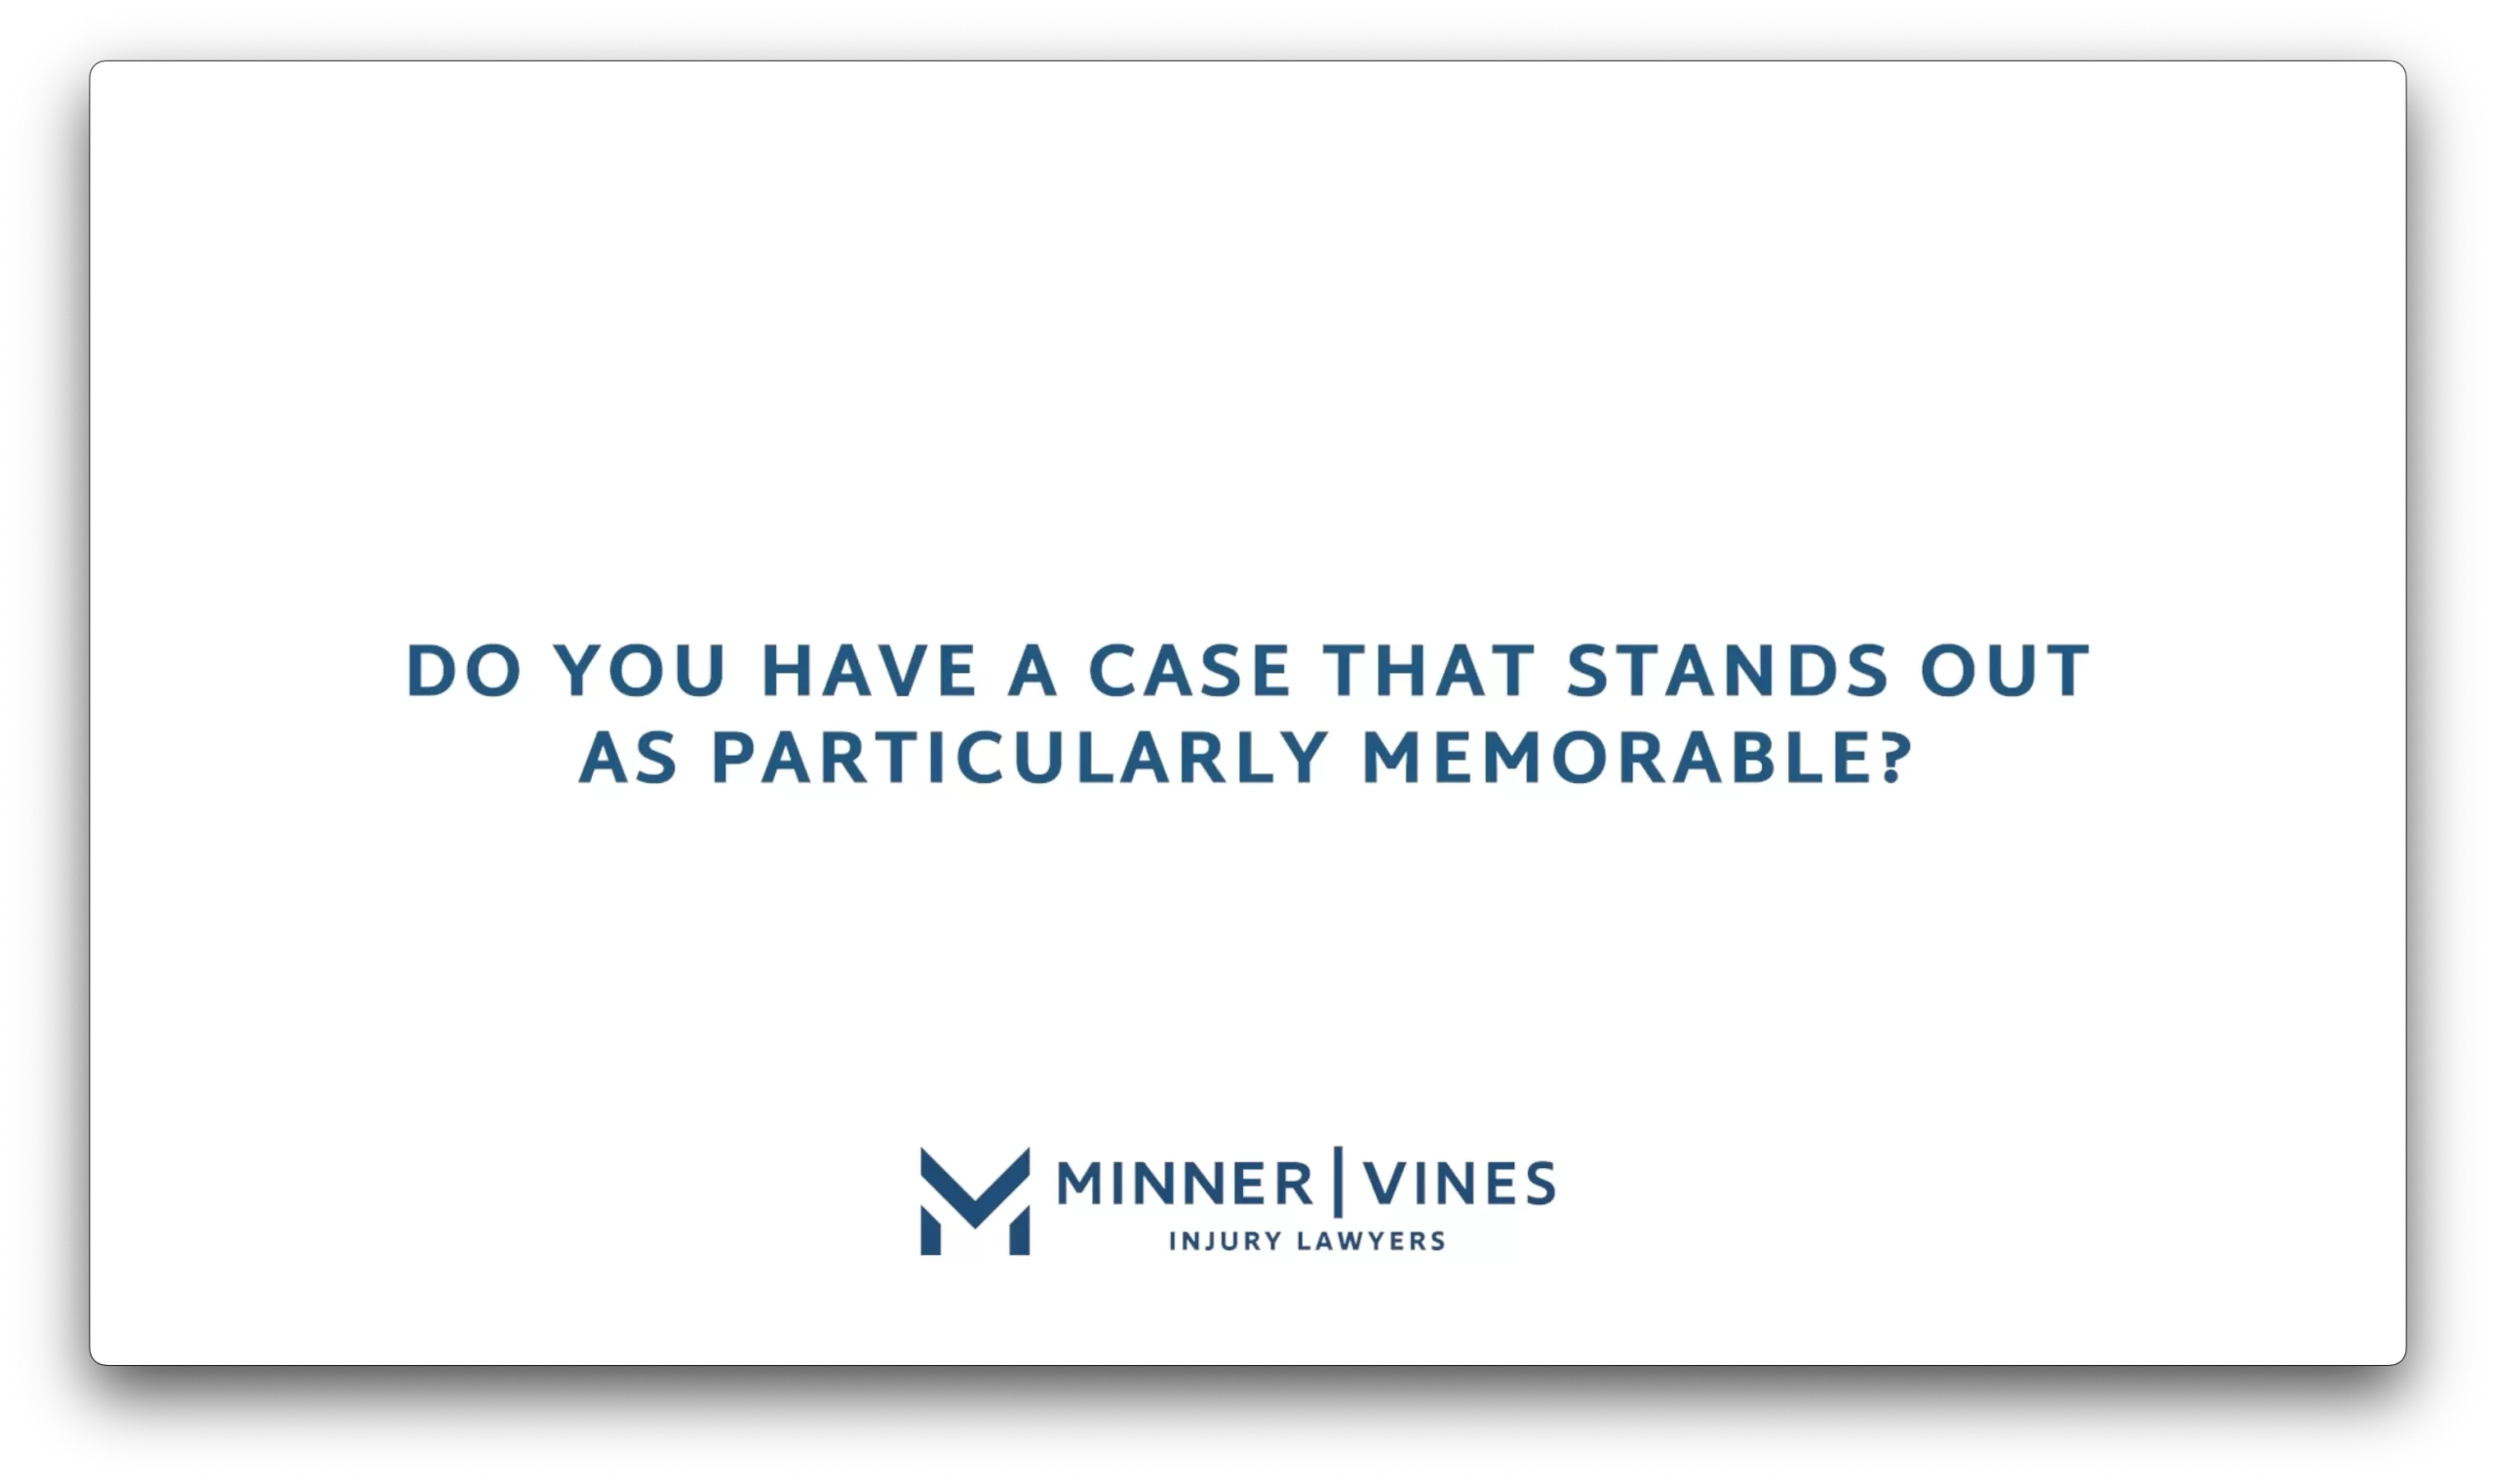 Do you have a case that stands out as particularly memorable?